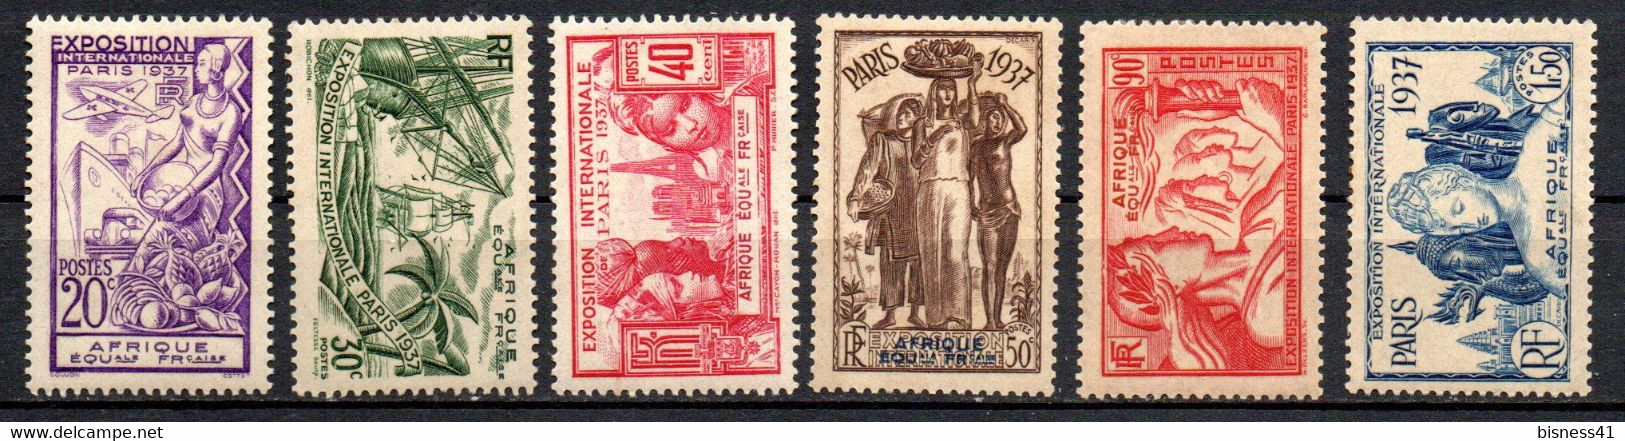 Col33 Colonie AEF Afrique  N° 27 à 32 Neuf X MH Cote : 24,00€ - Unused Stamps